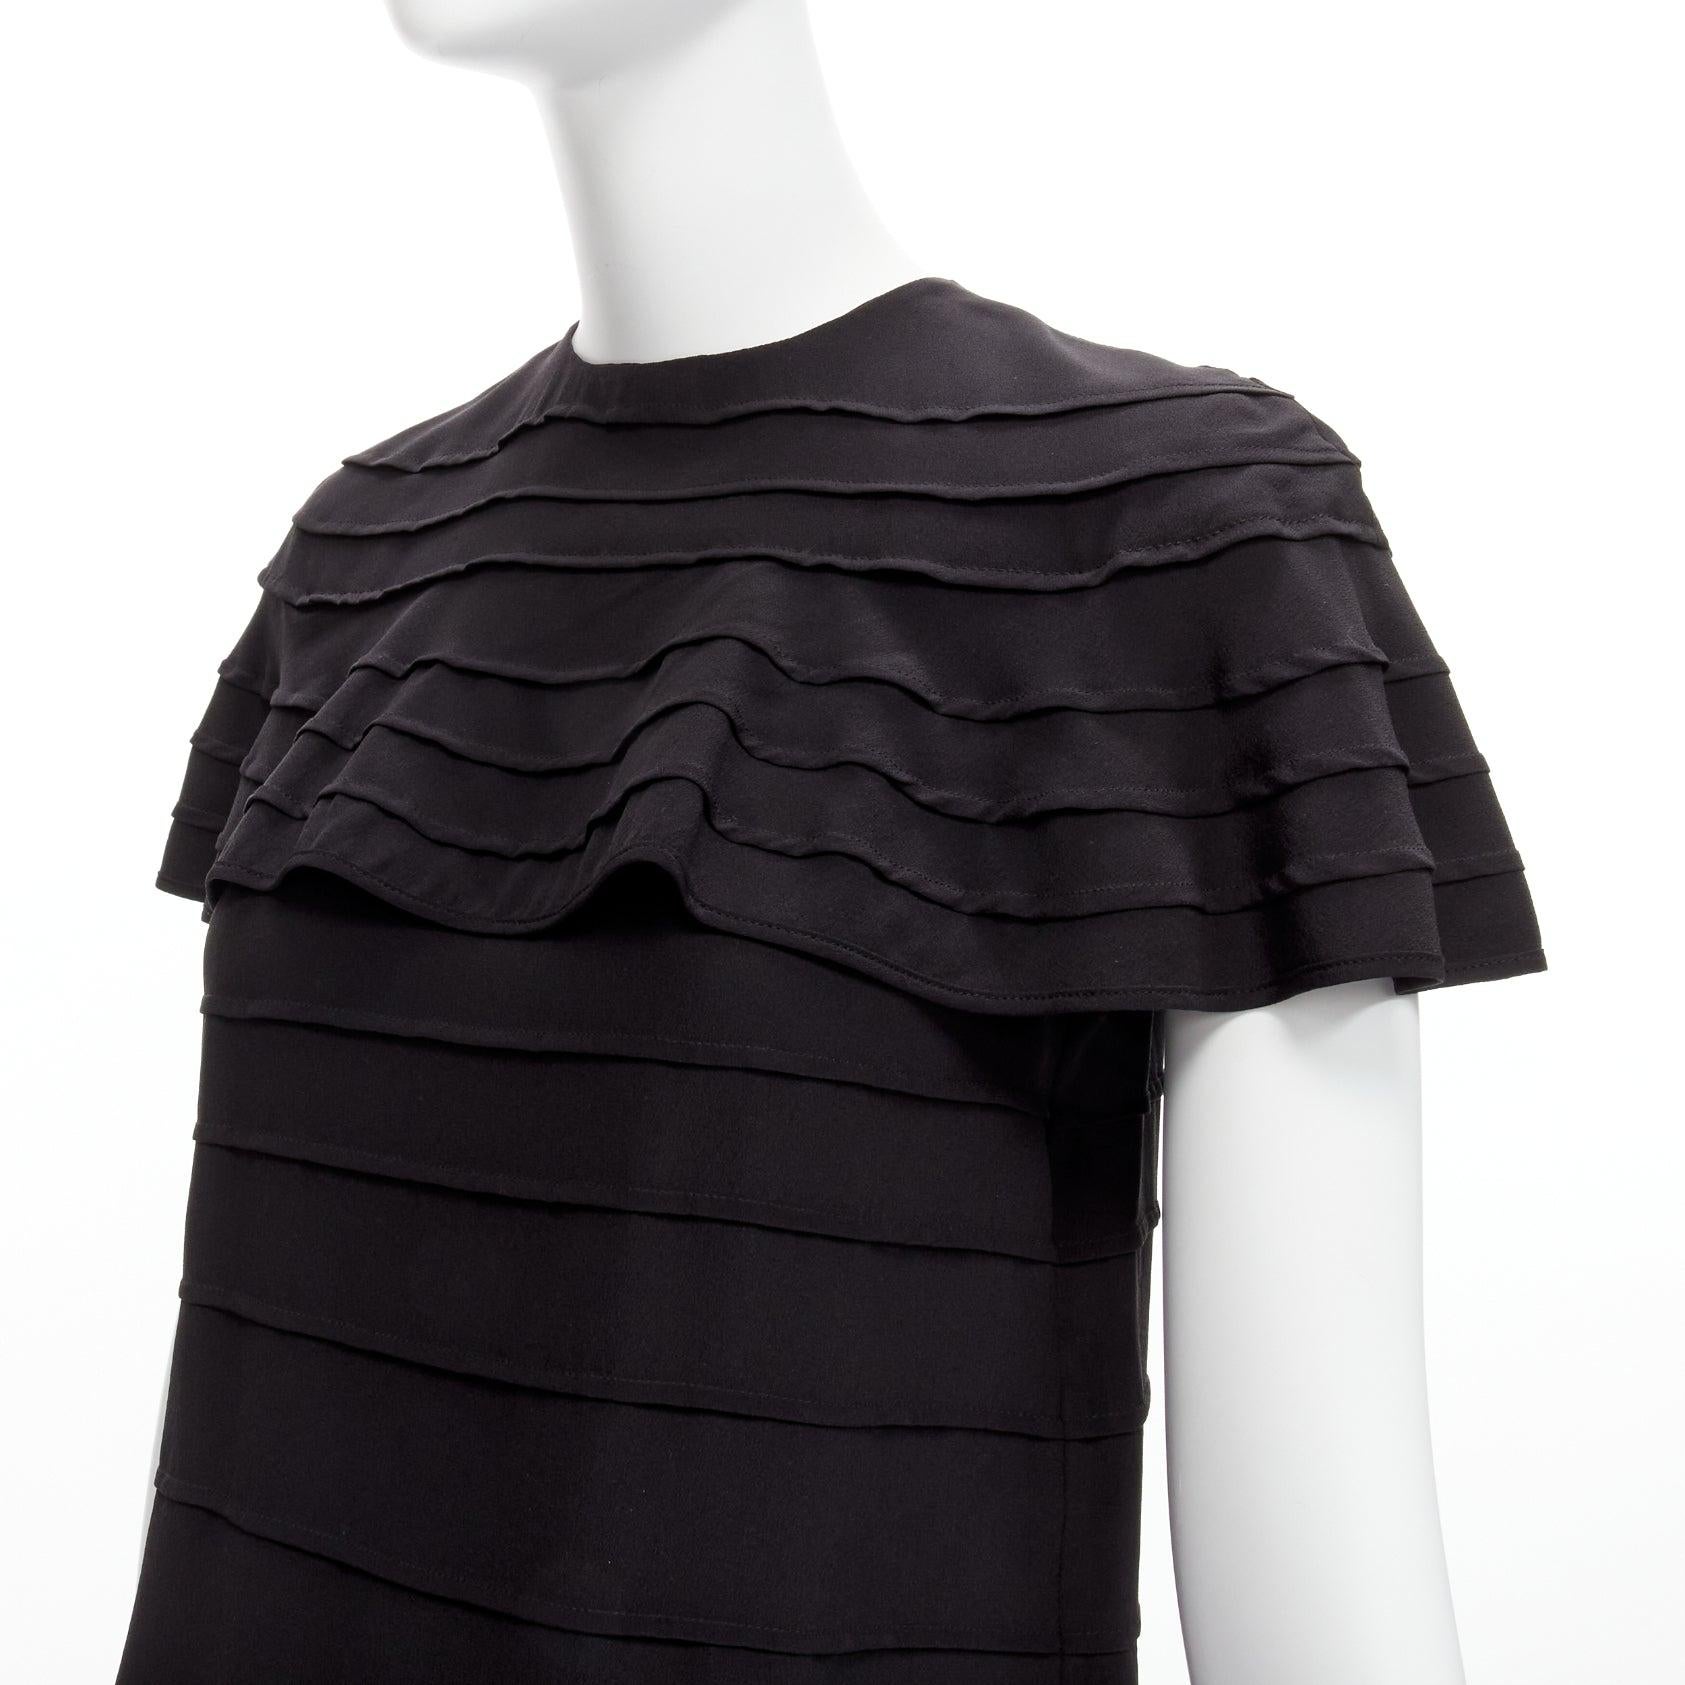 VALENTINO 100% silk black crepe cape sleeves tiered French seam blouse IT38 XS
Reference: LNKO/A02172
Brand: Valentino
Designer: Pier Paolo Piccioli
Material: Silk
Color: Black
Pattern: Solid
Closure: Zip
Extra Details: Back zip.
Made in: